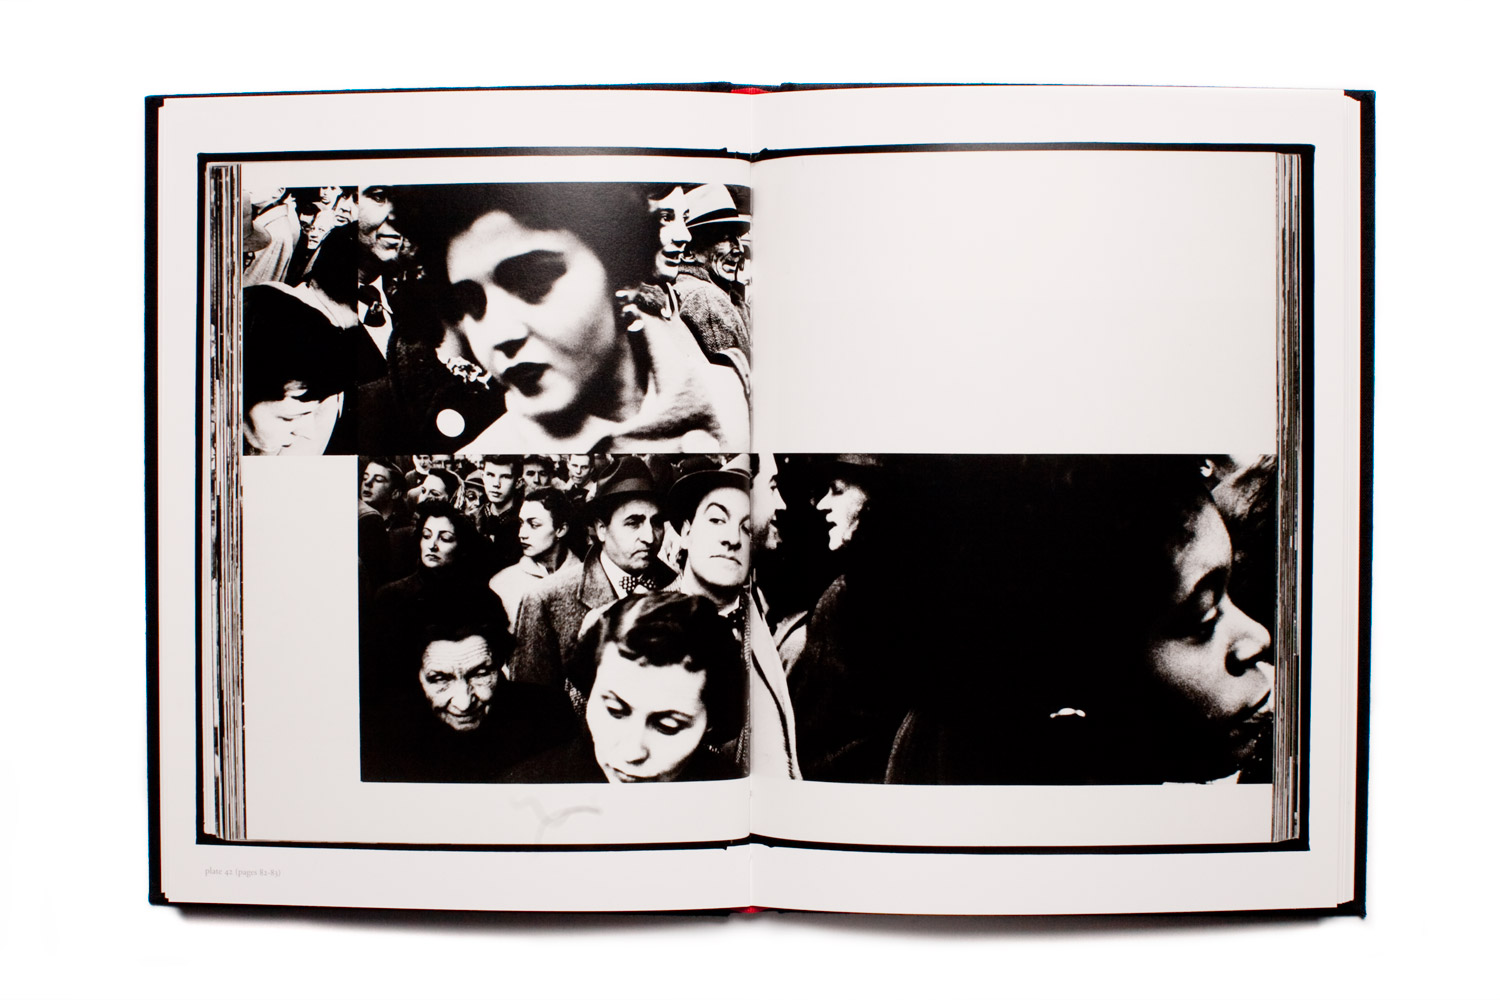 The Errata Editions printing ends with American Art historian Max Kozloff's essay called William Klein and the Radioactive, which puts Klein’s brilliantly photographed and designed magnum opus into context.